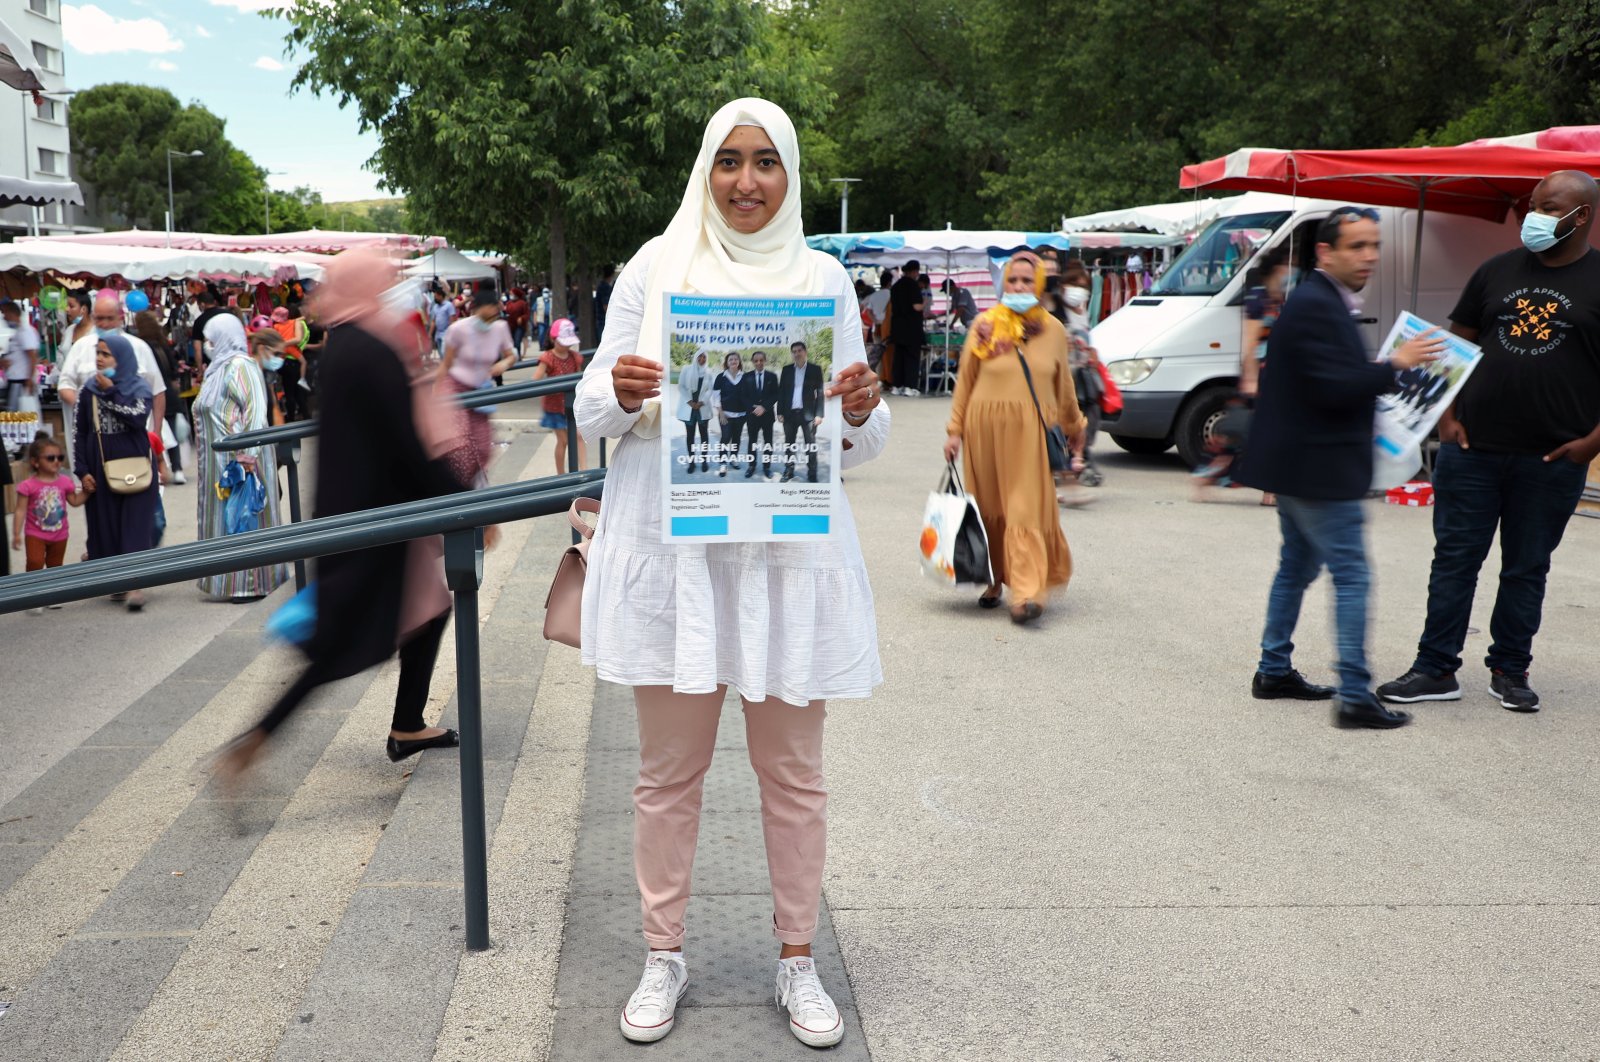 French local election candidate Sara Zemmahi, wearing a headscarf, holds her campaign flyer with the slogan "Different, but united for you" as she poses during an interview for Reuters ahead of the upcoming French local elections in the La Mosson market in Montpellier, France, June 5, 2021. (Reuters Photo)